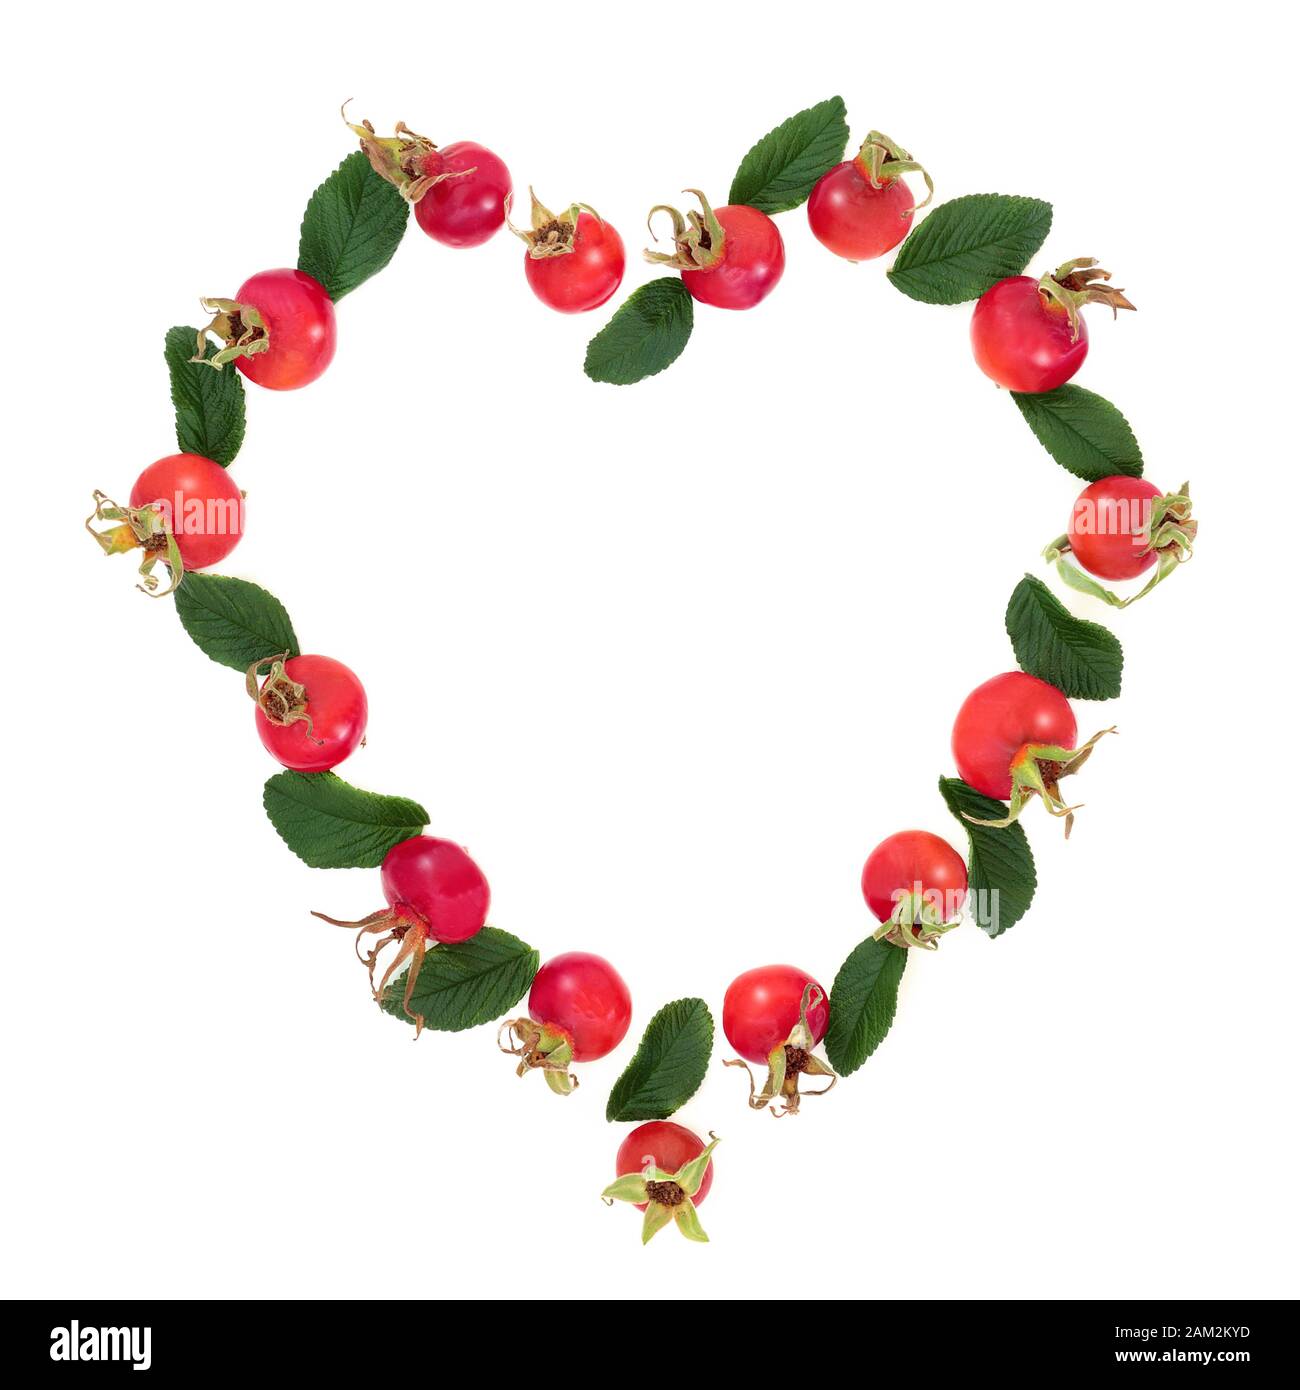 Abstract heart shaped rosehip wreath with berry fruit and leaves. Very high in vitamin c and antioxidants on white background with copy space. Stock Photo